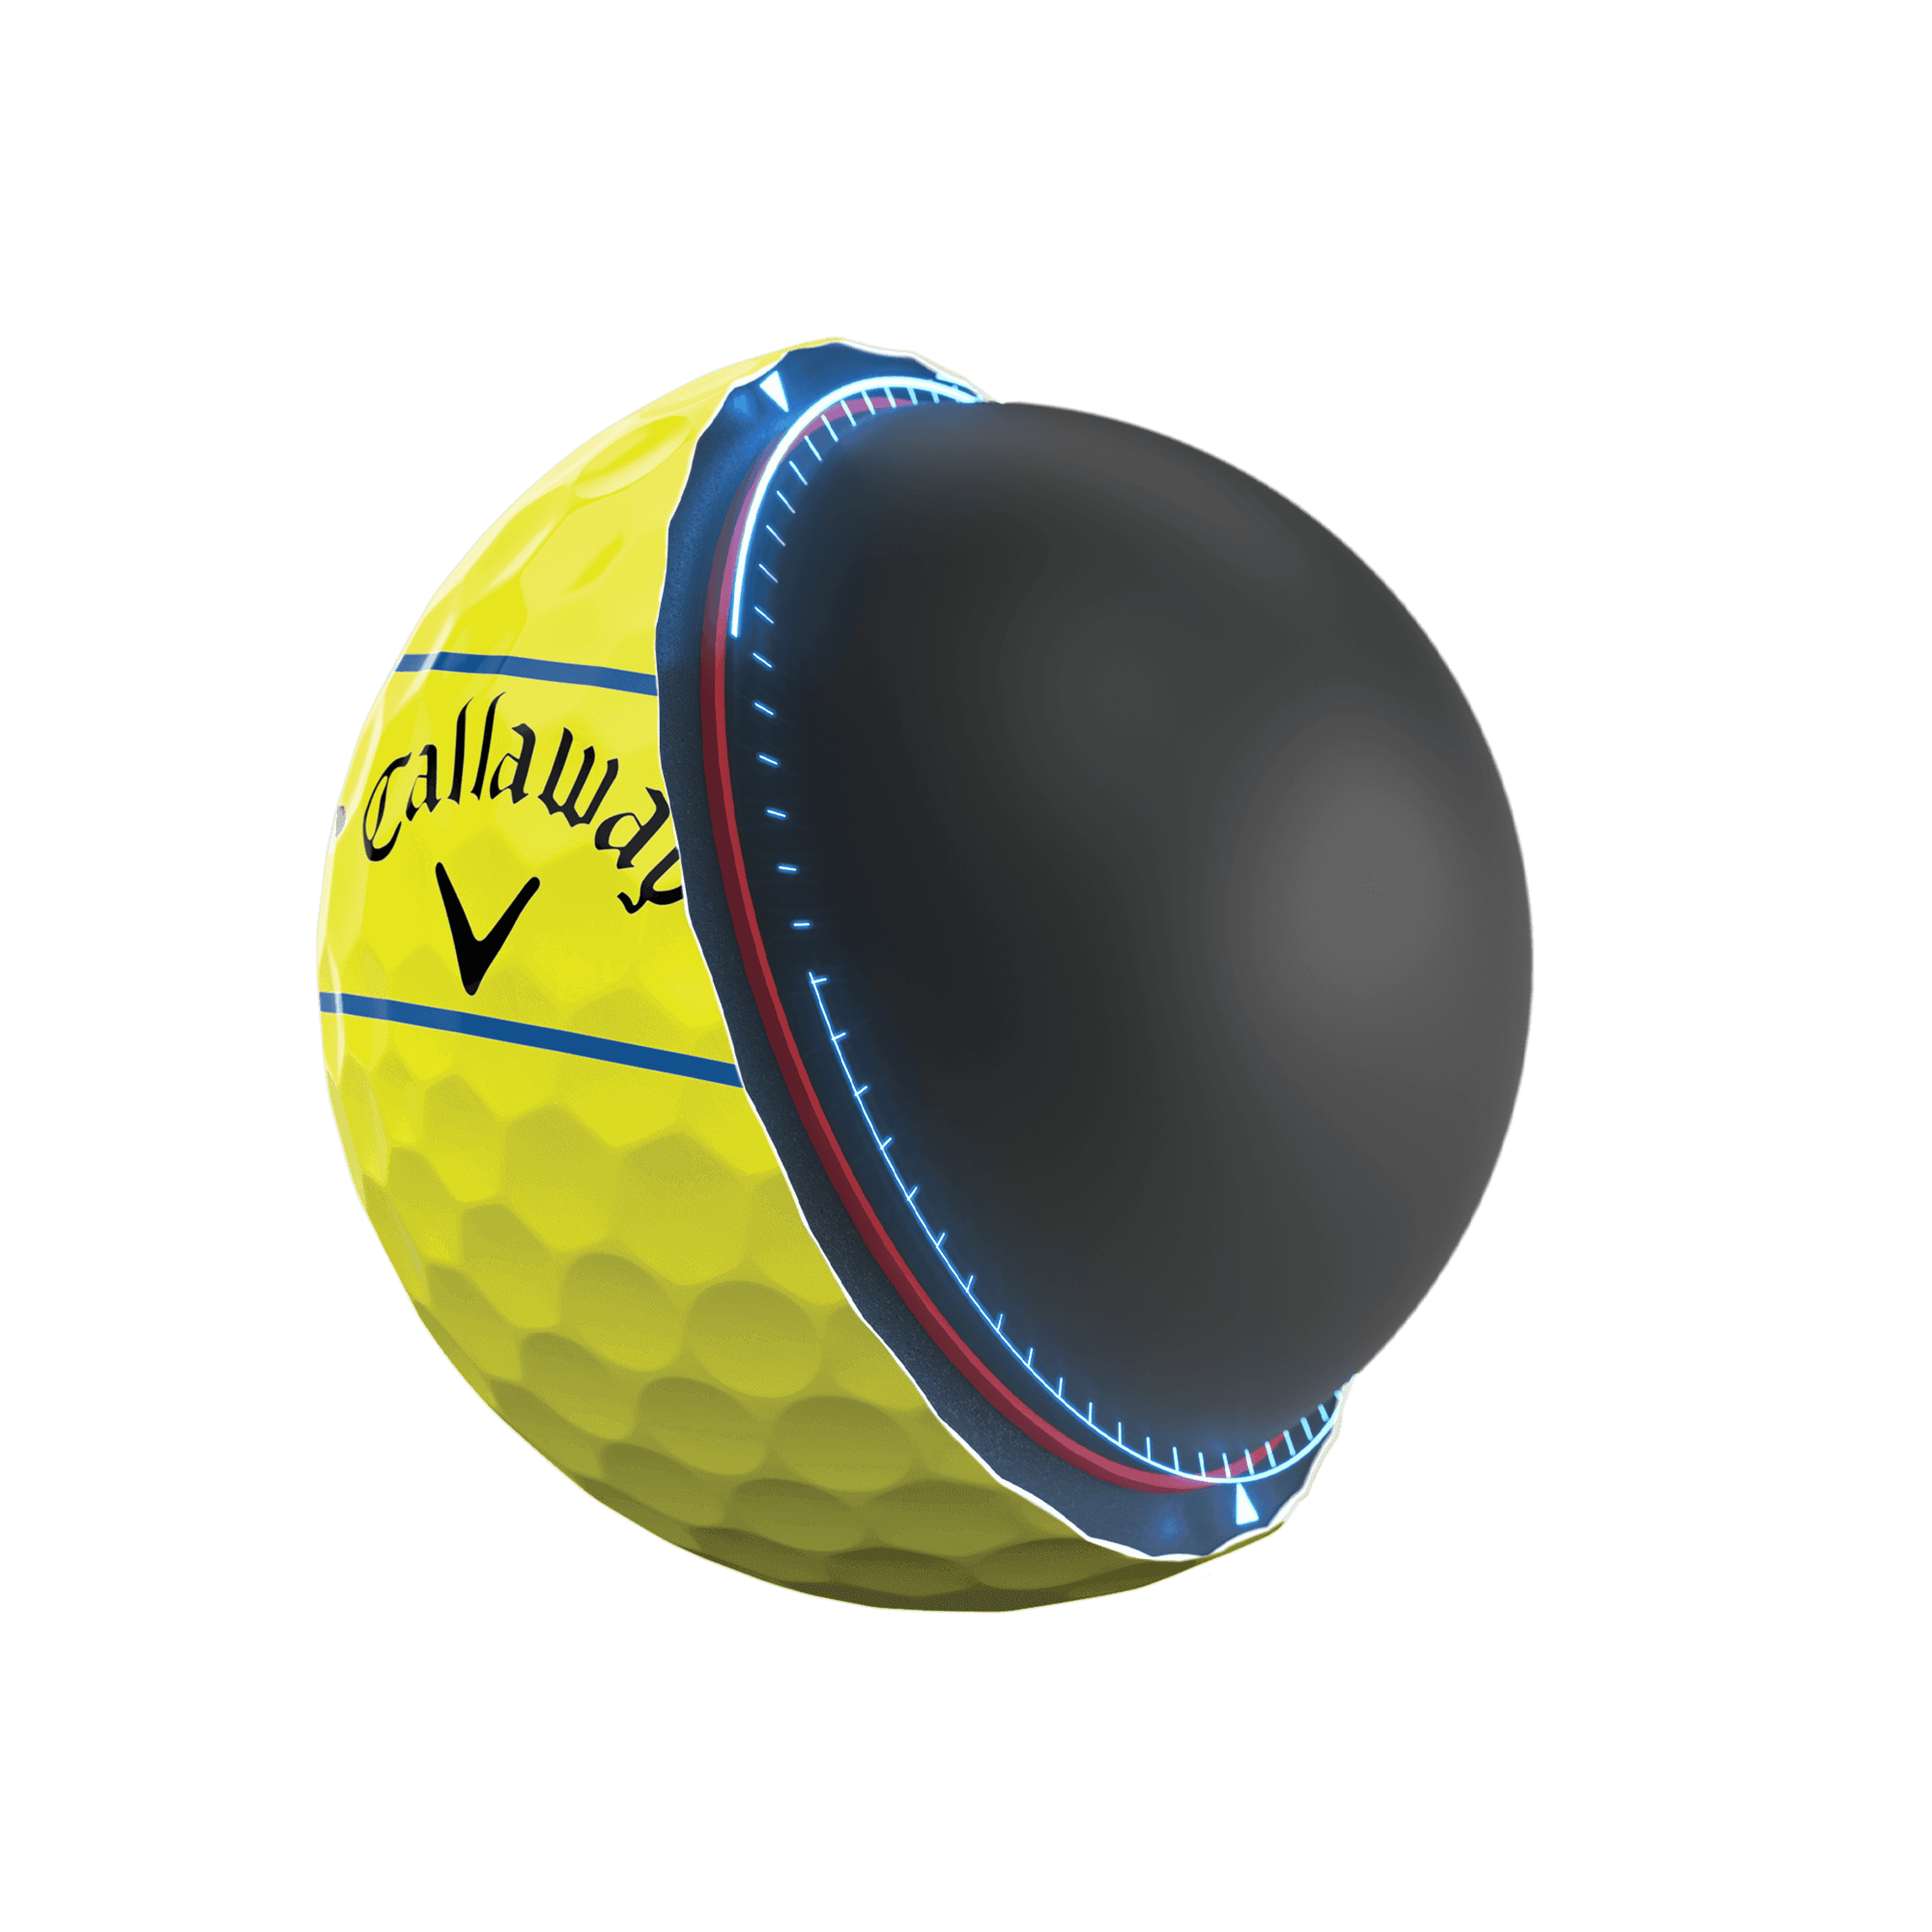 Chrome Tour X 360 Triple Track Yellow Golf Balls features and benefits